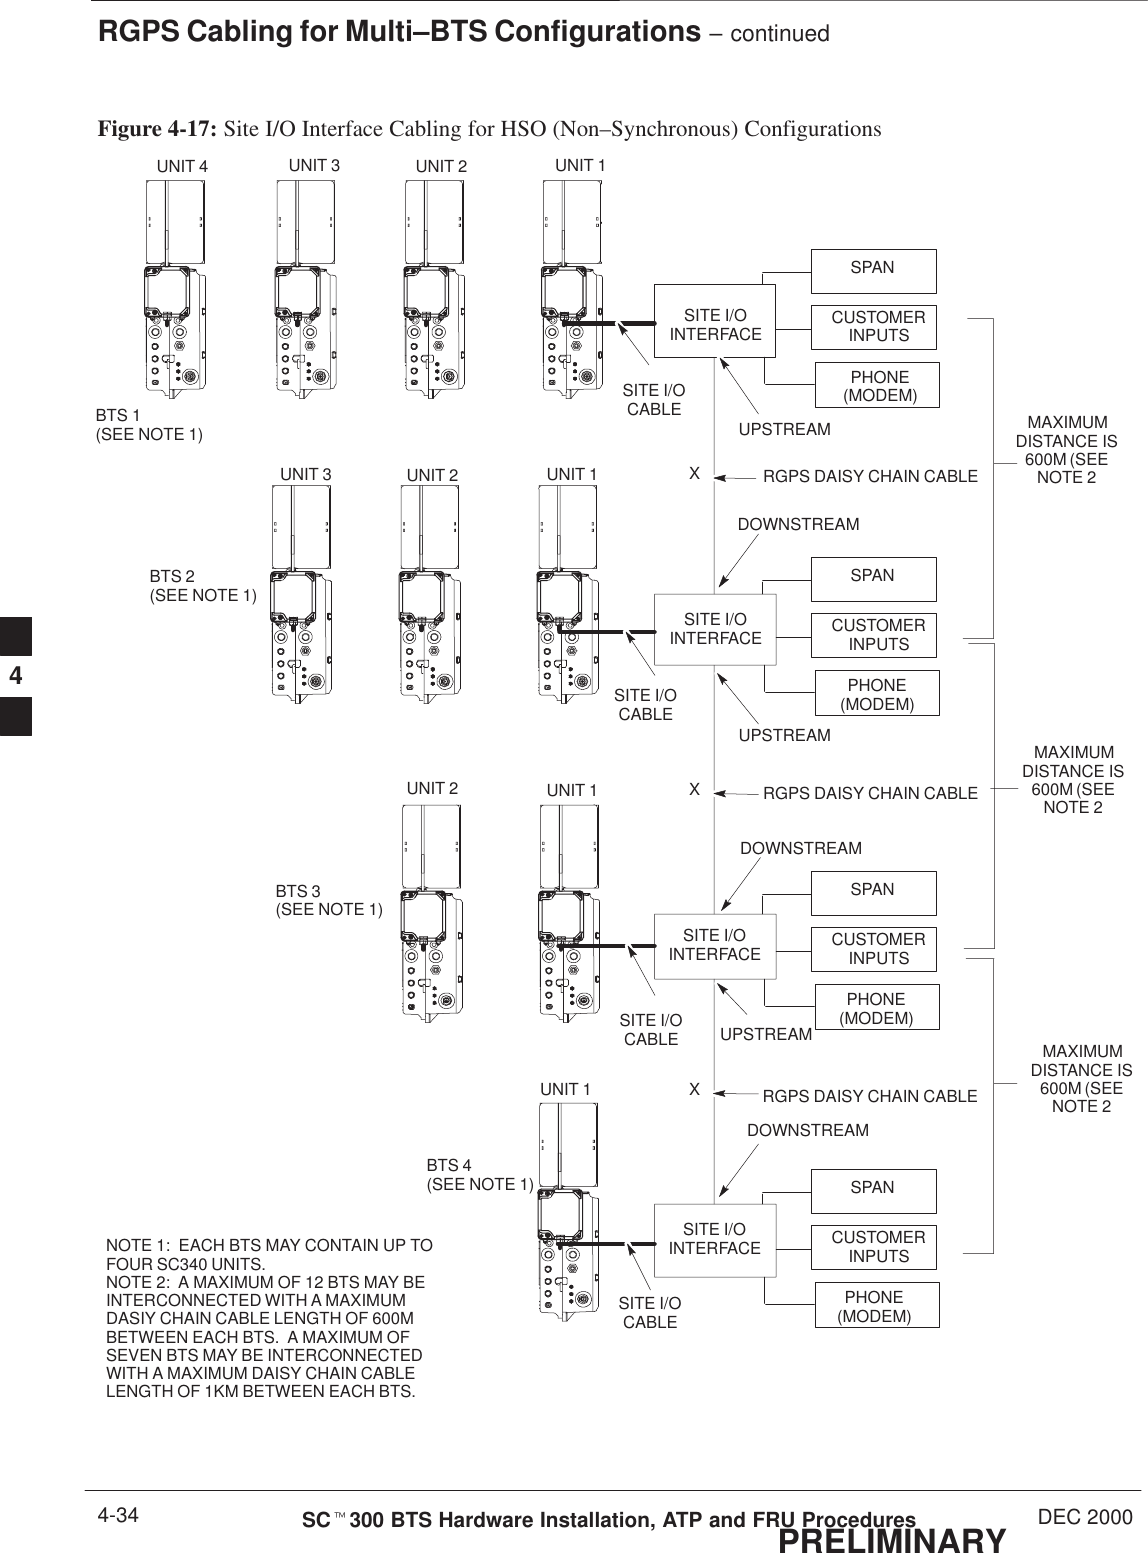 RGPS Cabling for Multi–BTS Configurations – continuedPRELIMINARYSCt300 BTS Hardware Installation, ATP and FRU Procedures DEC 20004-34Figure 4-17: Site I/O Interface Cabling for HSO (Non–Synchronous) ConfigurationsCUSTOMERINPUTSSPANPHONE(MODEM)SITE I/OINTERFACESITE I/OCABLECUSTOMERINPUTSSPANPHONE(MODEM)SITE I/OCABLECUSTOMERINPUTSSPANPHONE(MODEM)SITE I/OCABLECUSTOMERINPUTSSPANPHONE(MODEM)SITE I/OCABLERGPS DAISY CHAIN CABLERGPS DAISY CHAIN CABLERGPS DAISY CHAIN CABLEMAXIMUMDISTANCE IS600M (SEENOTE 2BTS 1 (SEE NOTE 1)BTS 2(SEE NOTE 1)BTS 3(SEE NOTE 1)BTS 4(SEE NOTE 1)UNIT 4 UNIT 3 UNIT 2 UNIT 1UNIT 3 UNIT 2 UNIT 1UNIT 2 UNIT 1UNIT 1XXXMAXIMUMDISTANCE IS600M (SEENOTE 2MAXIMUMDISTANCE IS600M (SEENOTE 2DOWNSTREAMDOWNSTREAMDOWNSTREAMUPSTREAMUPSTREAMUPSTREAMNOTE 1:  EACH BTS MAY CONTAIN UP TOFOUR SC340 UNITS.NOTE 2:  A MAXIMUM OF 12 BTS MAY BEINTERCONNECTED WITH A MAXIMUMDASIY CHAIN CABLE LENGTH OF 600MBETWEEN EACH BTS.  A MAXIMUM OFSEVEN BTS MAY BE INTERCONNECTEDWITH A MAXIMUM DAISY CHAIN CABLELENGTH OF 1KM BETWEEN EACH BTS.SITE I/OINTERFACESITE I/OINTERFACESITE I/OINTERFACE4